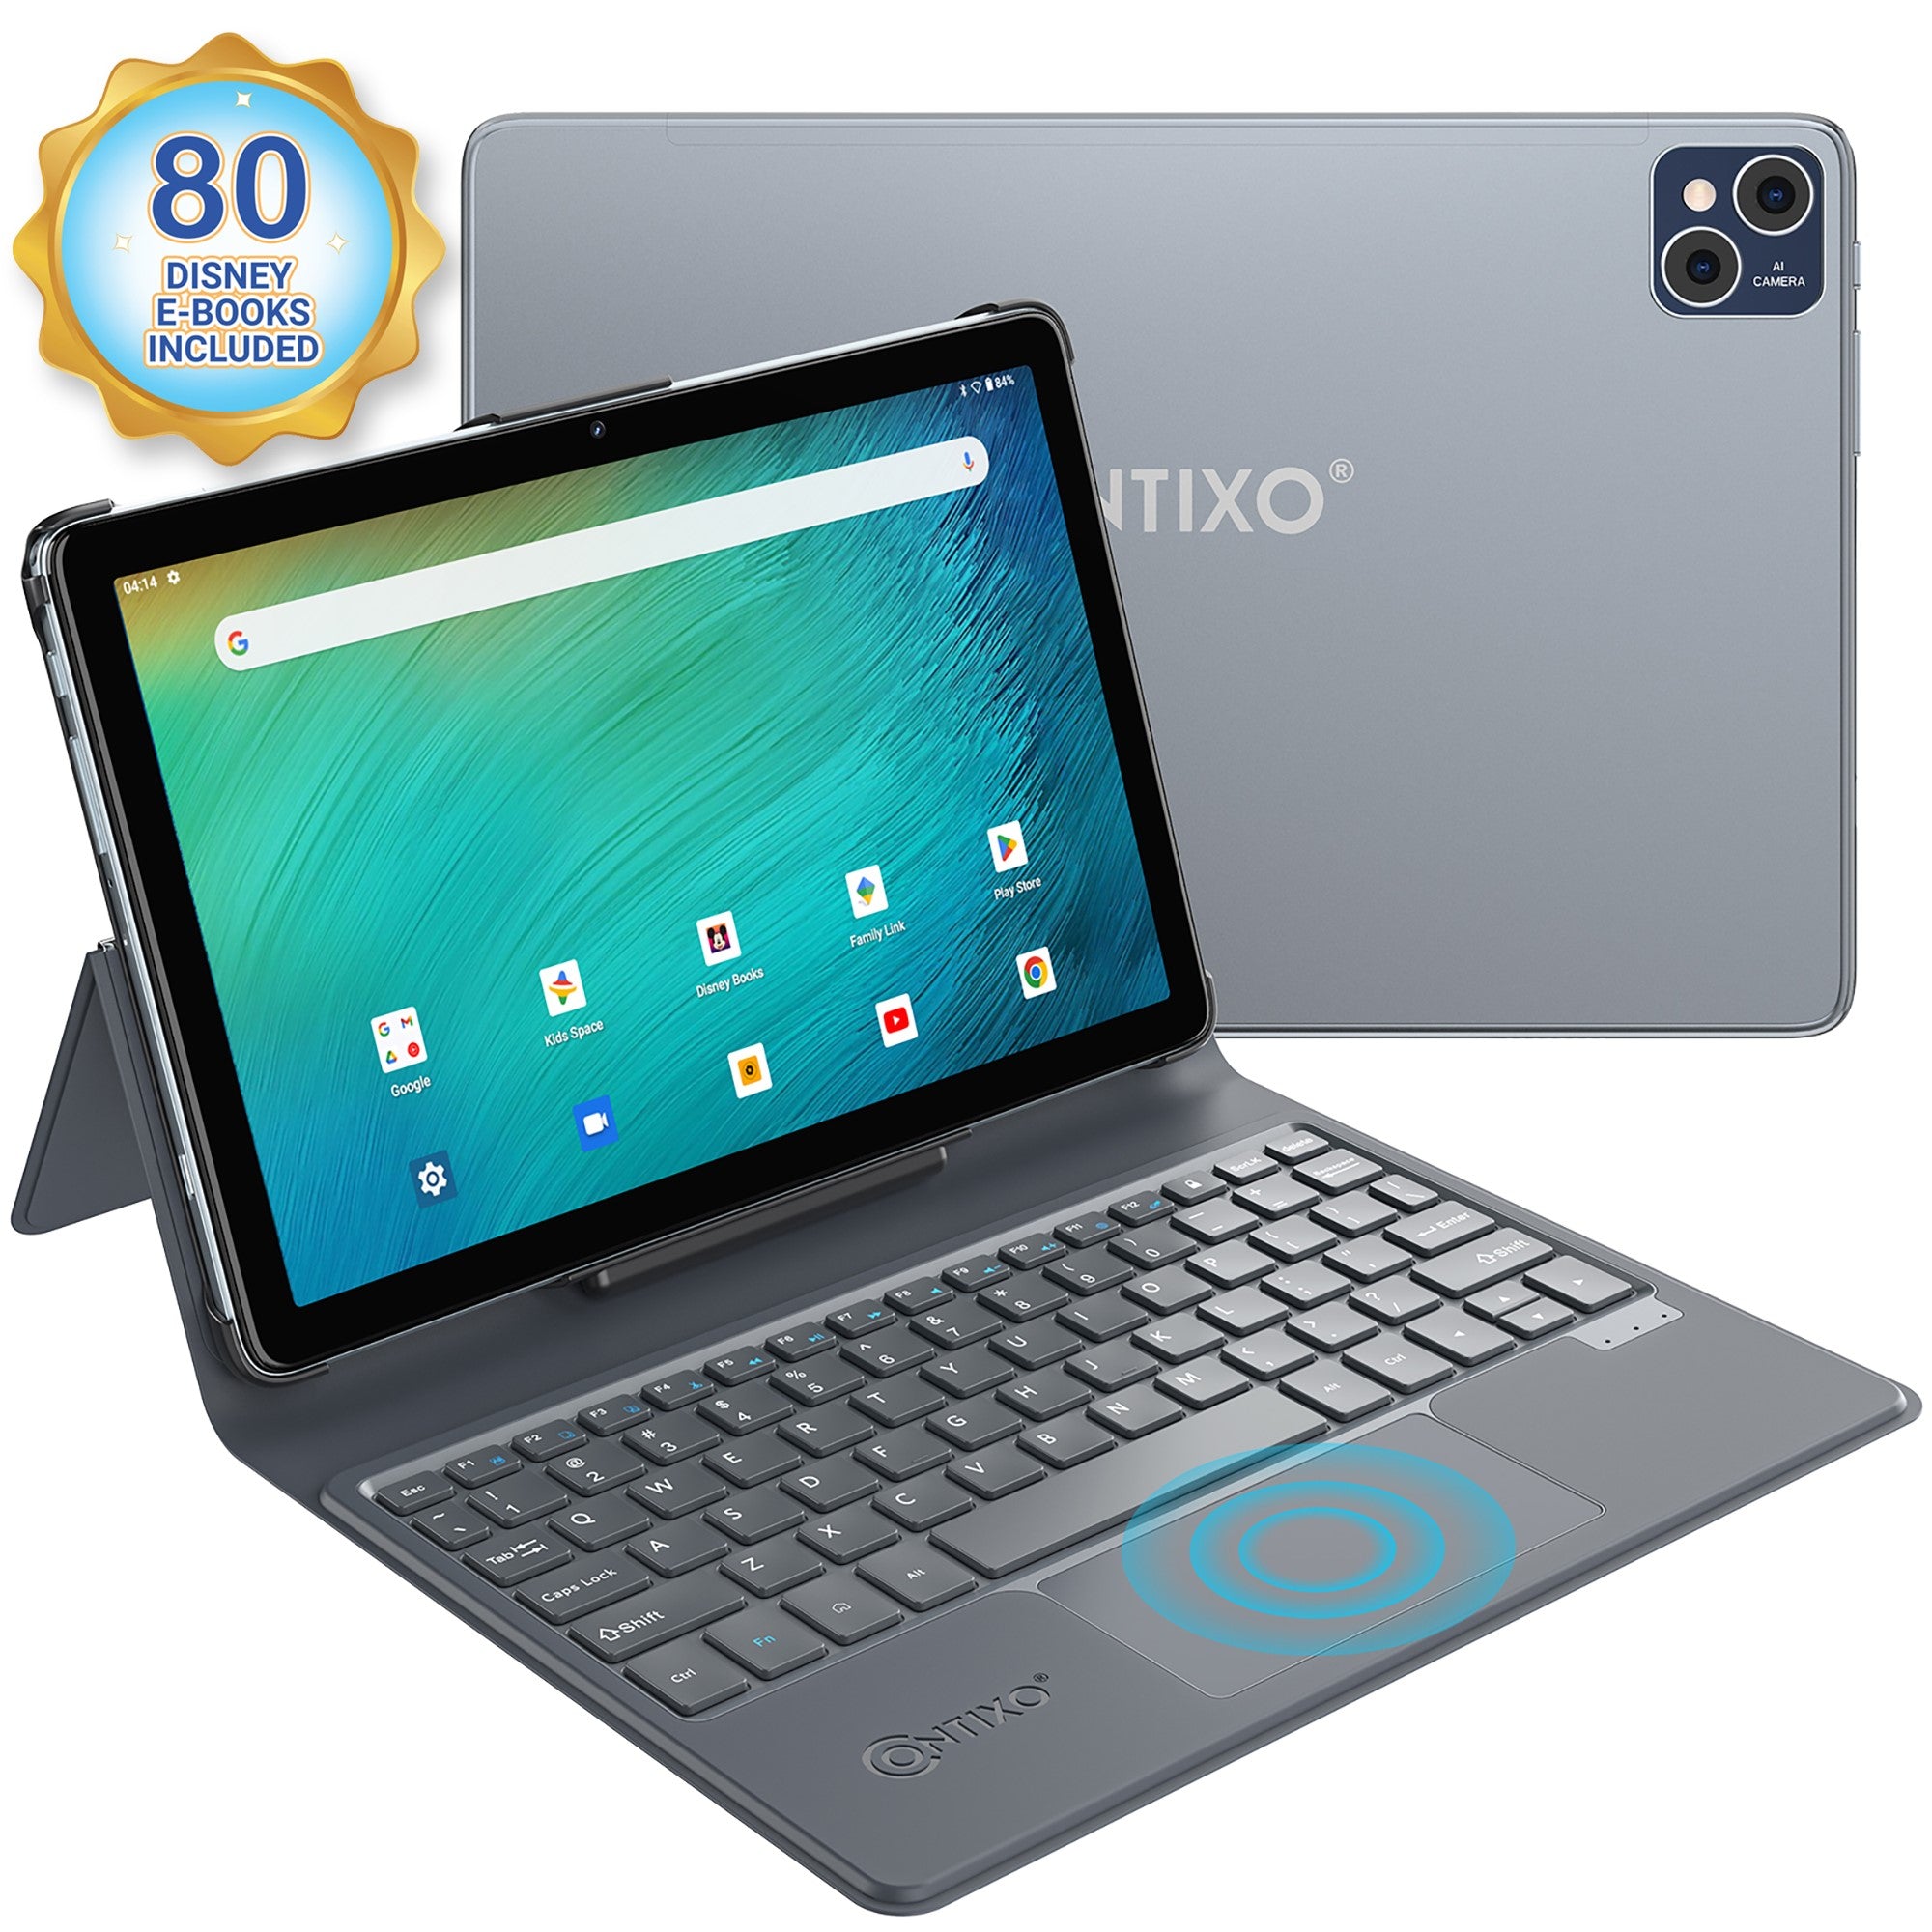 Contixo A1 10" Educational Android Tablet With Docking Keyboard - 128GB